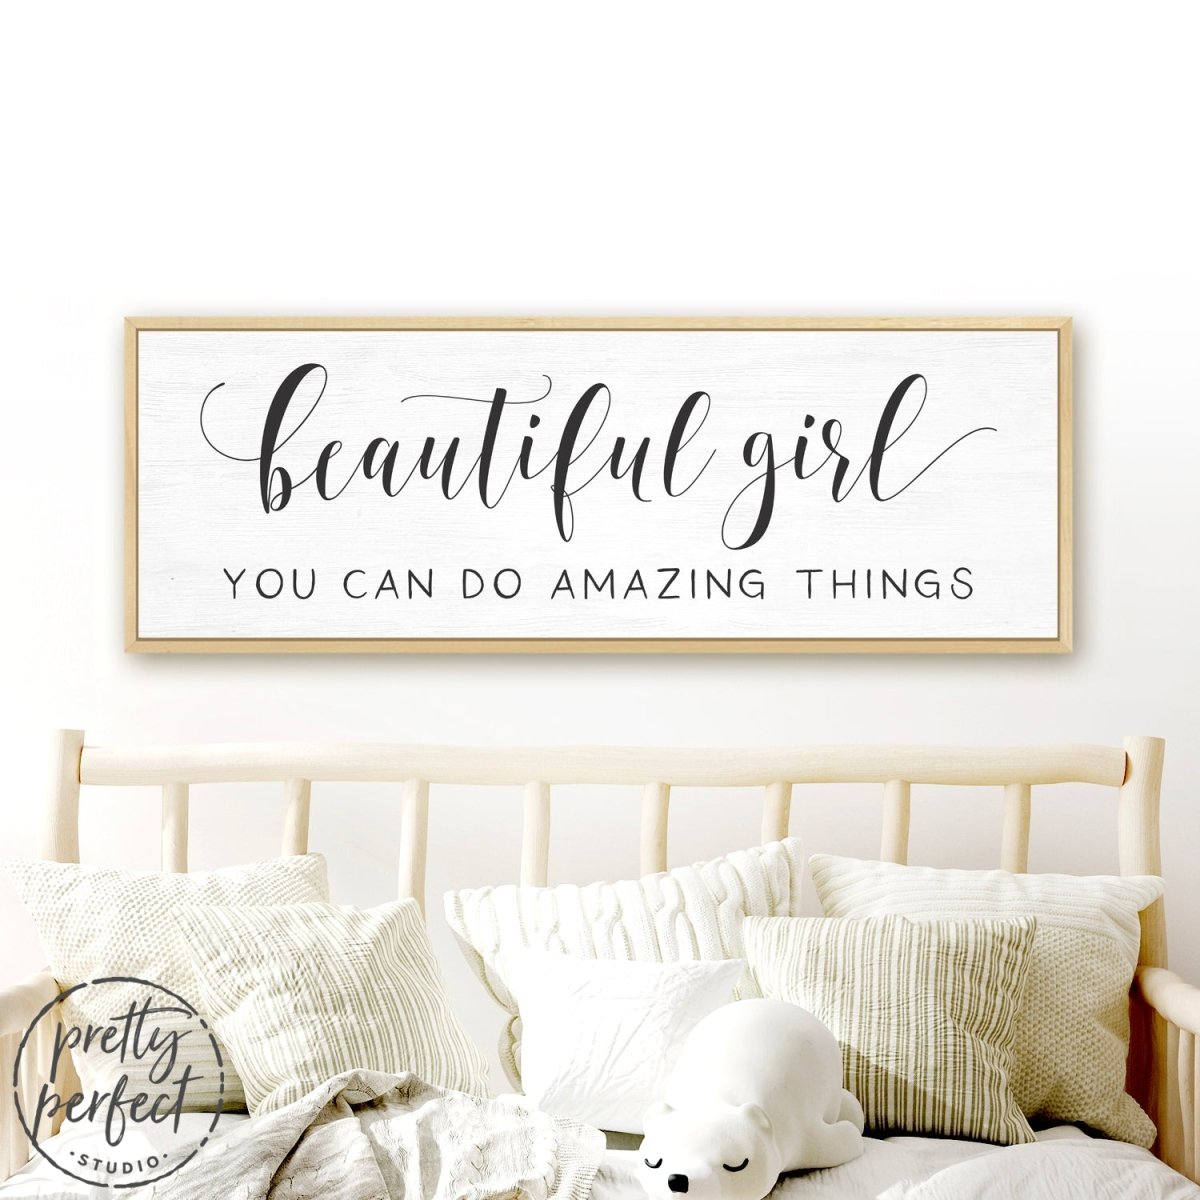 Beautiful Girl You Can Do Amazing Things Sign Hanging Above Bed in Children's Room - Pretty Perfect Studio